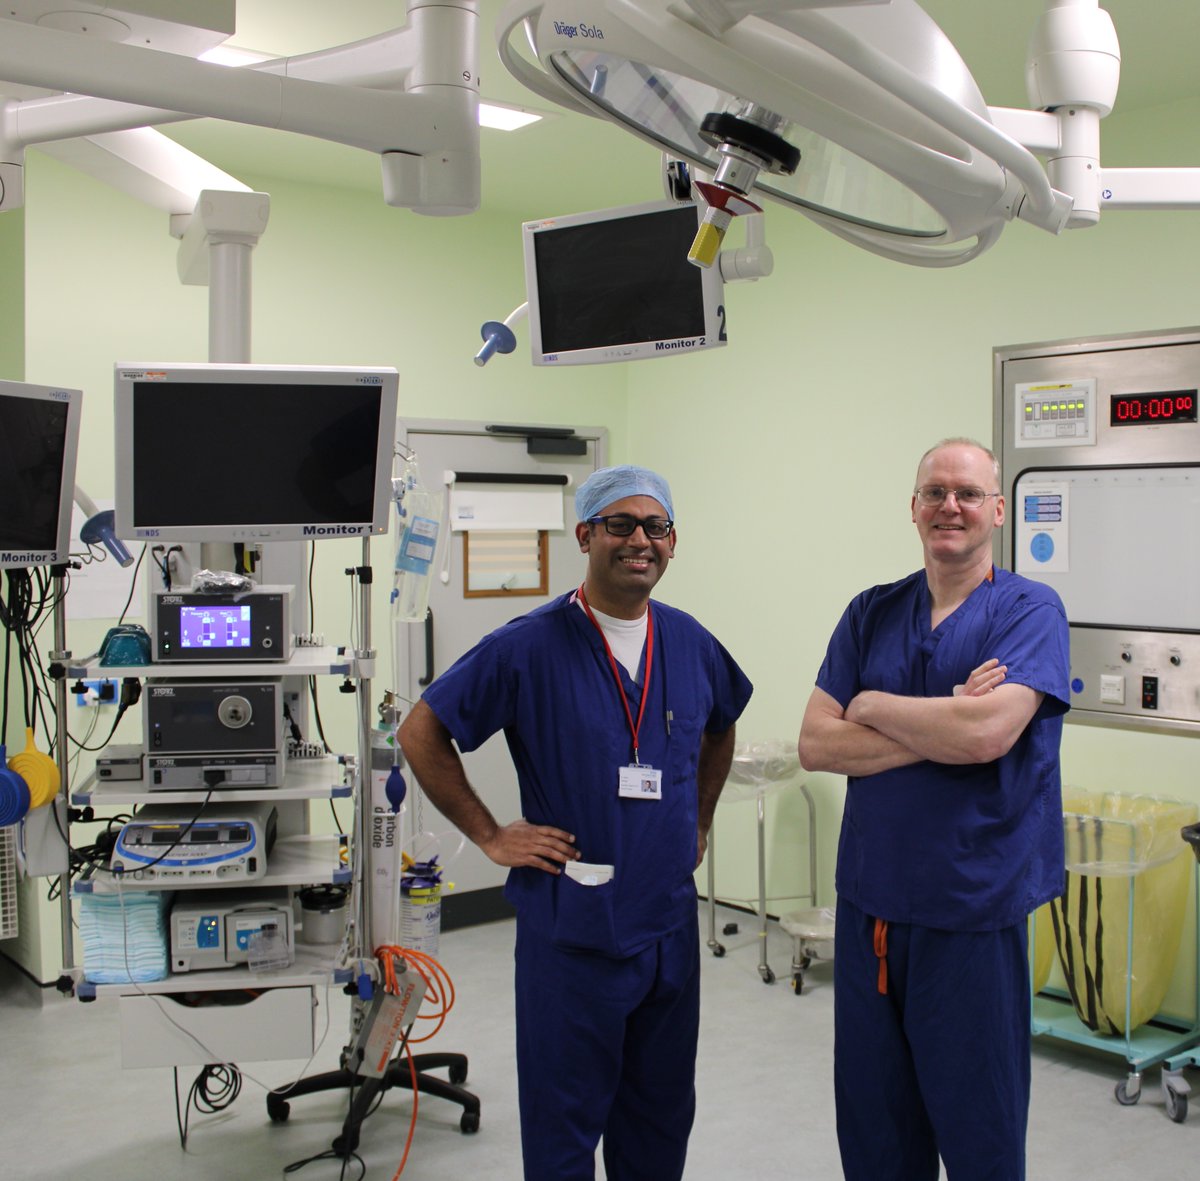 We are delighted that one of our consultant surgeons, Adrian Harris, was honoured at @ASiTofficial awards which recognise surgical training excellence. He was one of only a few surgeons to be shortlisted for a top award. For more: ow.ly/iiuK50NJfBB